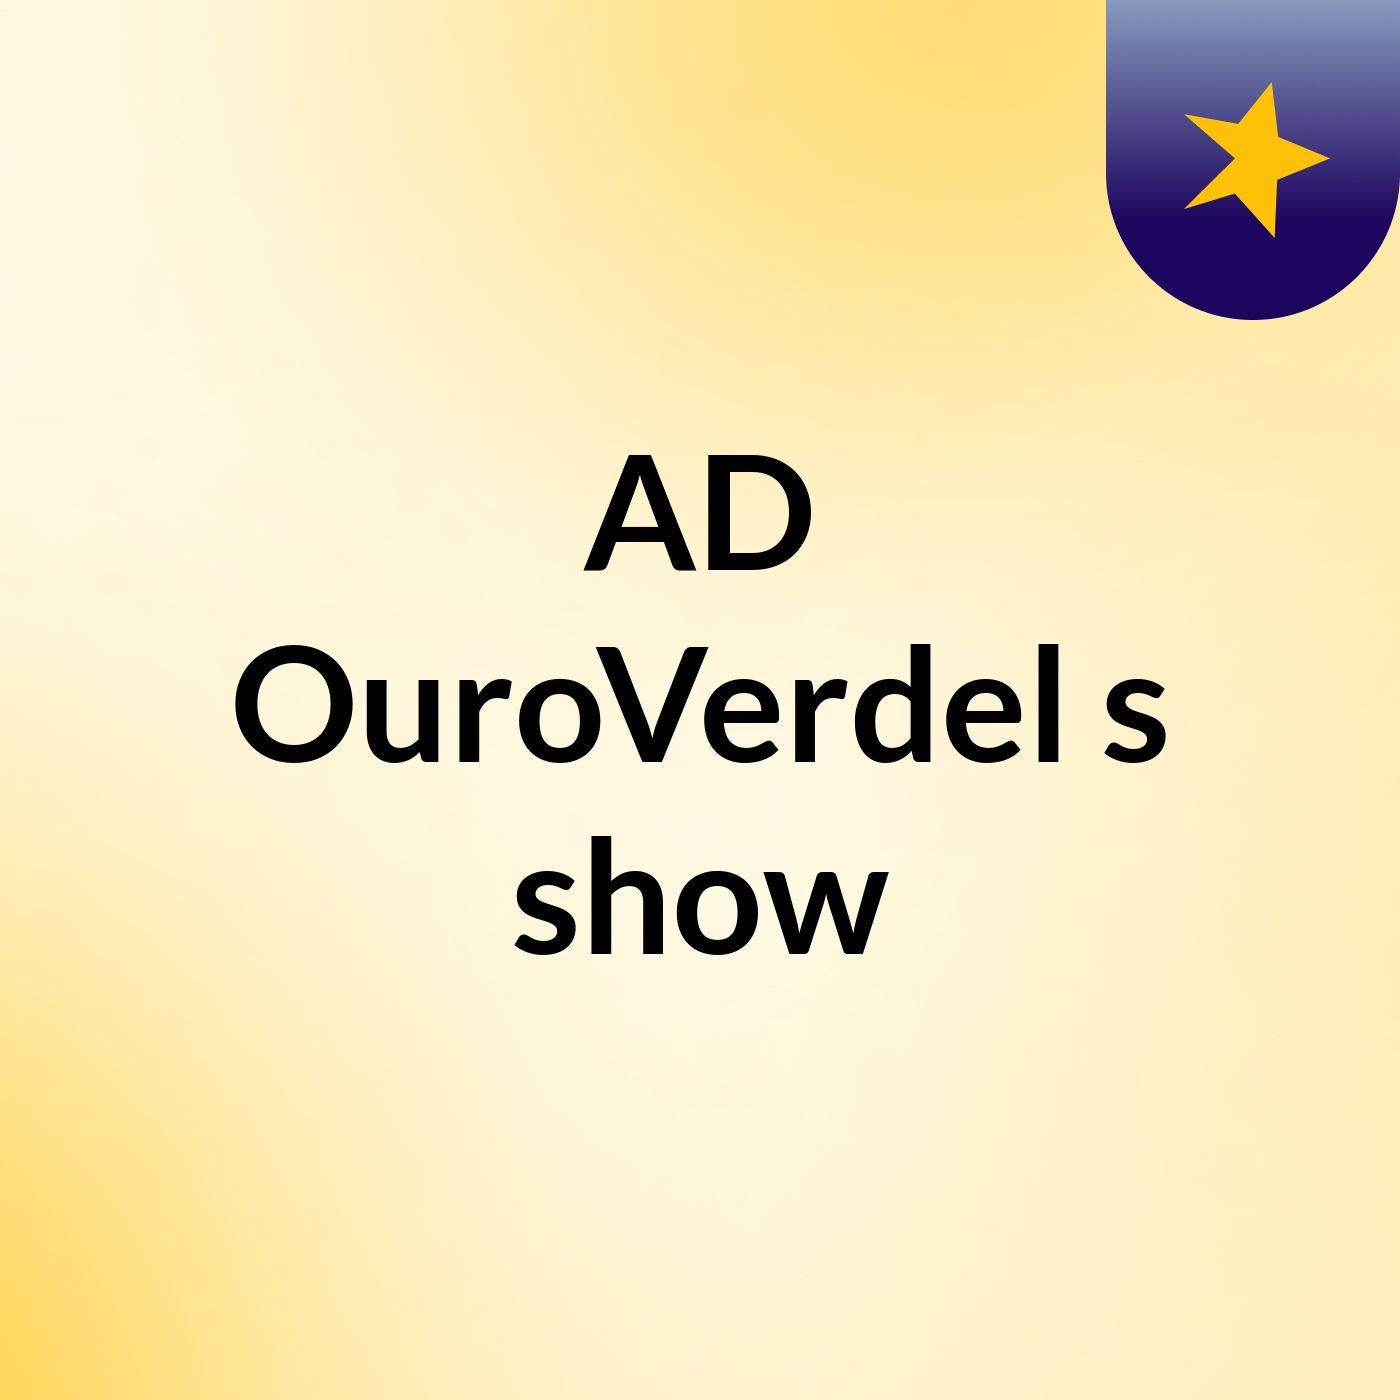 AD OuroVerdel's show